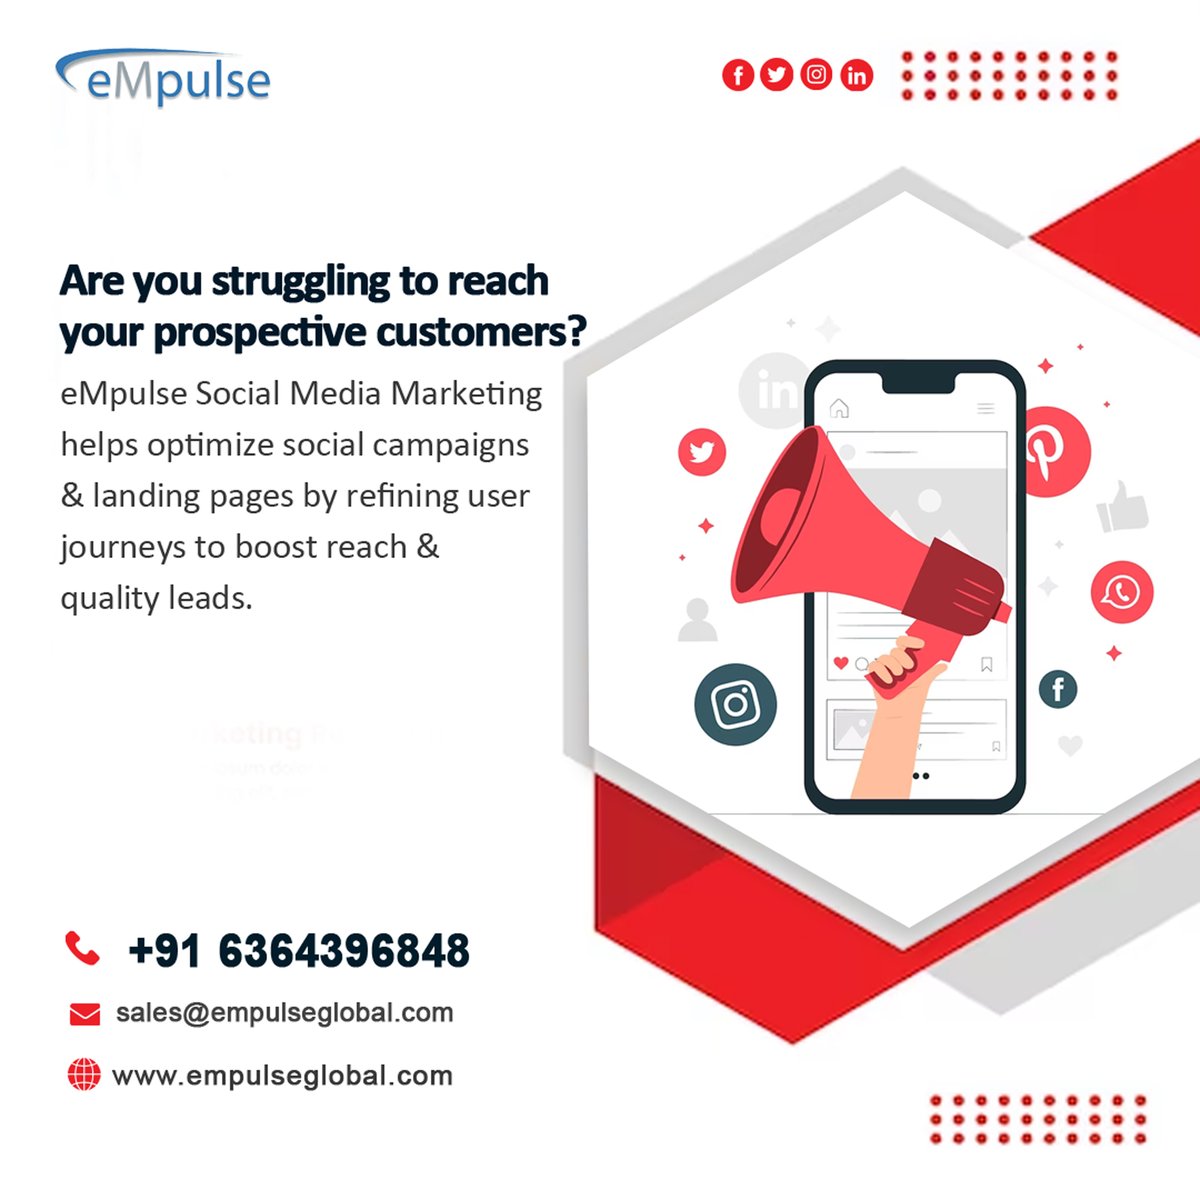 Are you struggling to reach your prospective customers? eMpulse Social Media Marketing helps optimize social campaigns & landing pages by refining user journeys to boost reach & quality leads. Visit: empulseglobal.com #empulseglobal #socialmediamarketing #socialcampaign